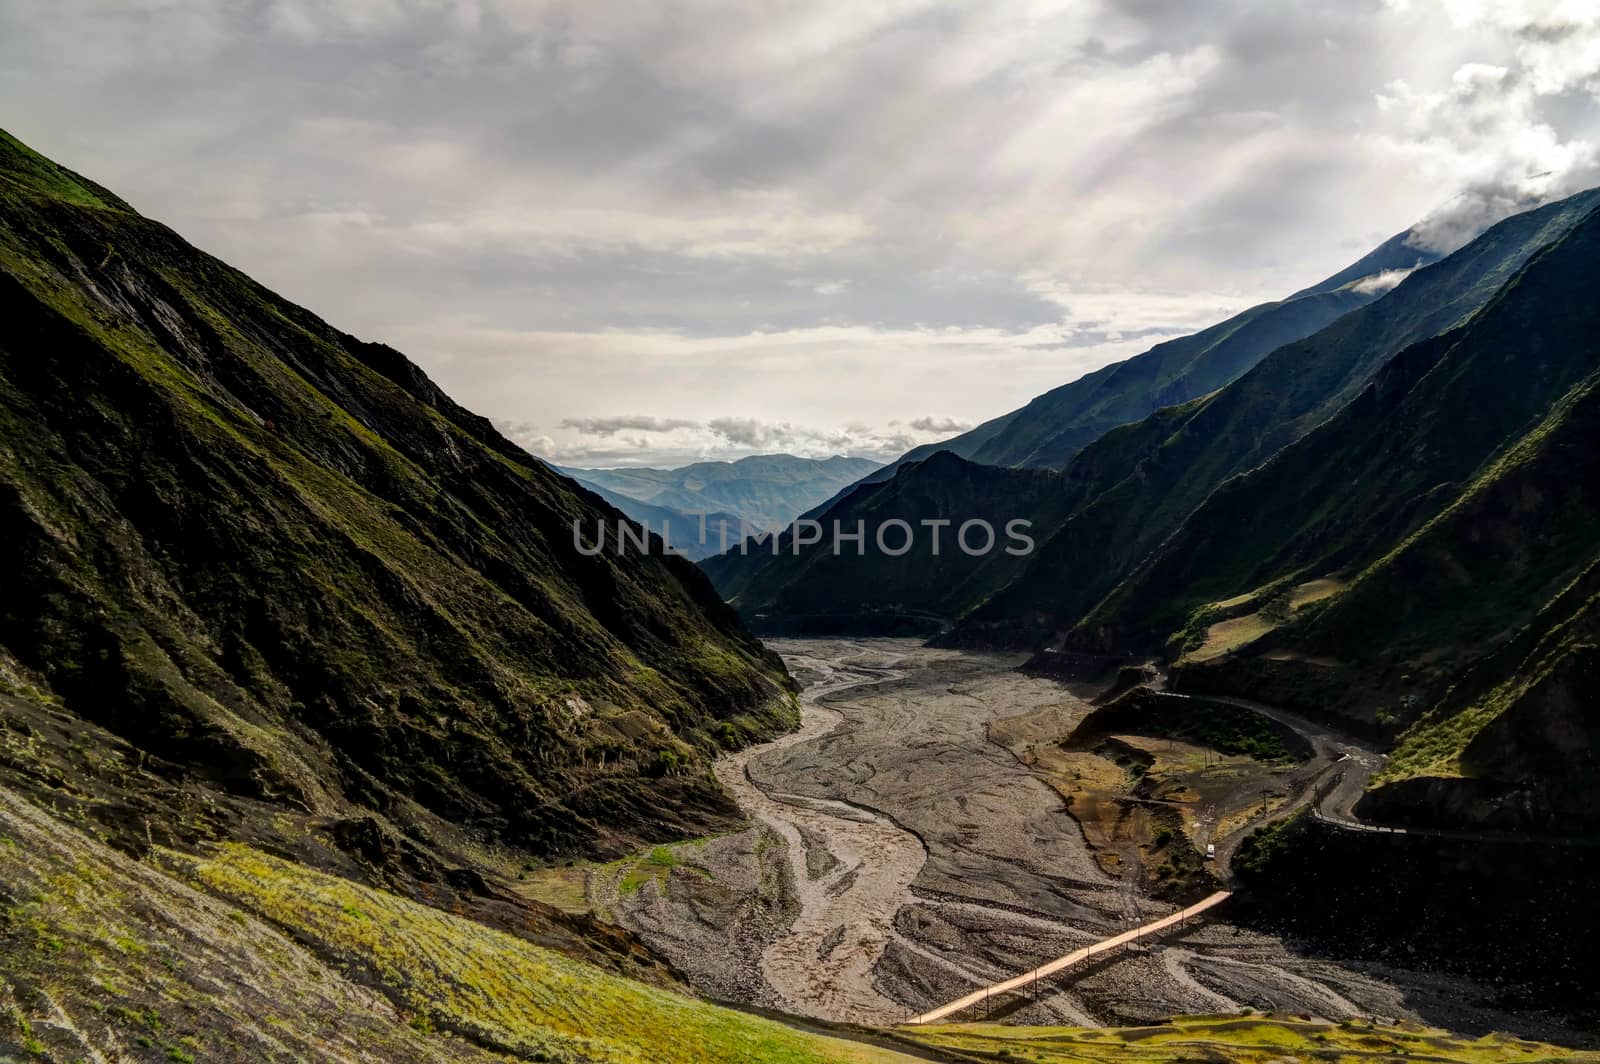 Panorama of Akhtychay river and valley, Midjakh Akhty Dagestan Russia by homocosmicos